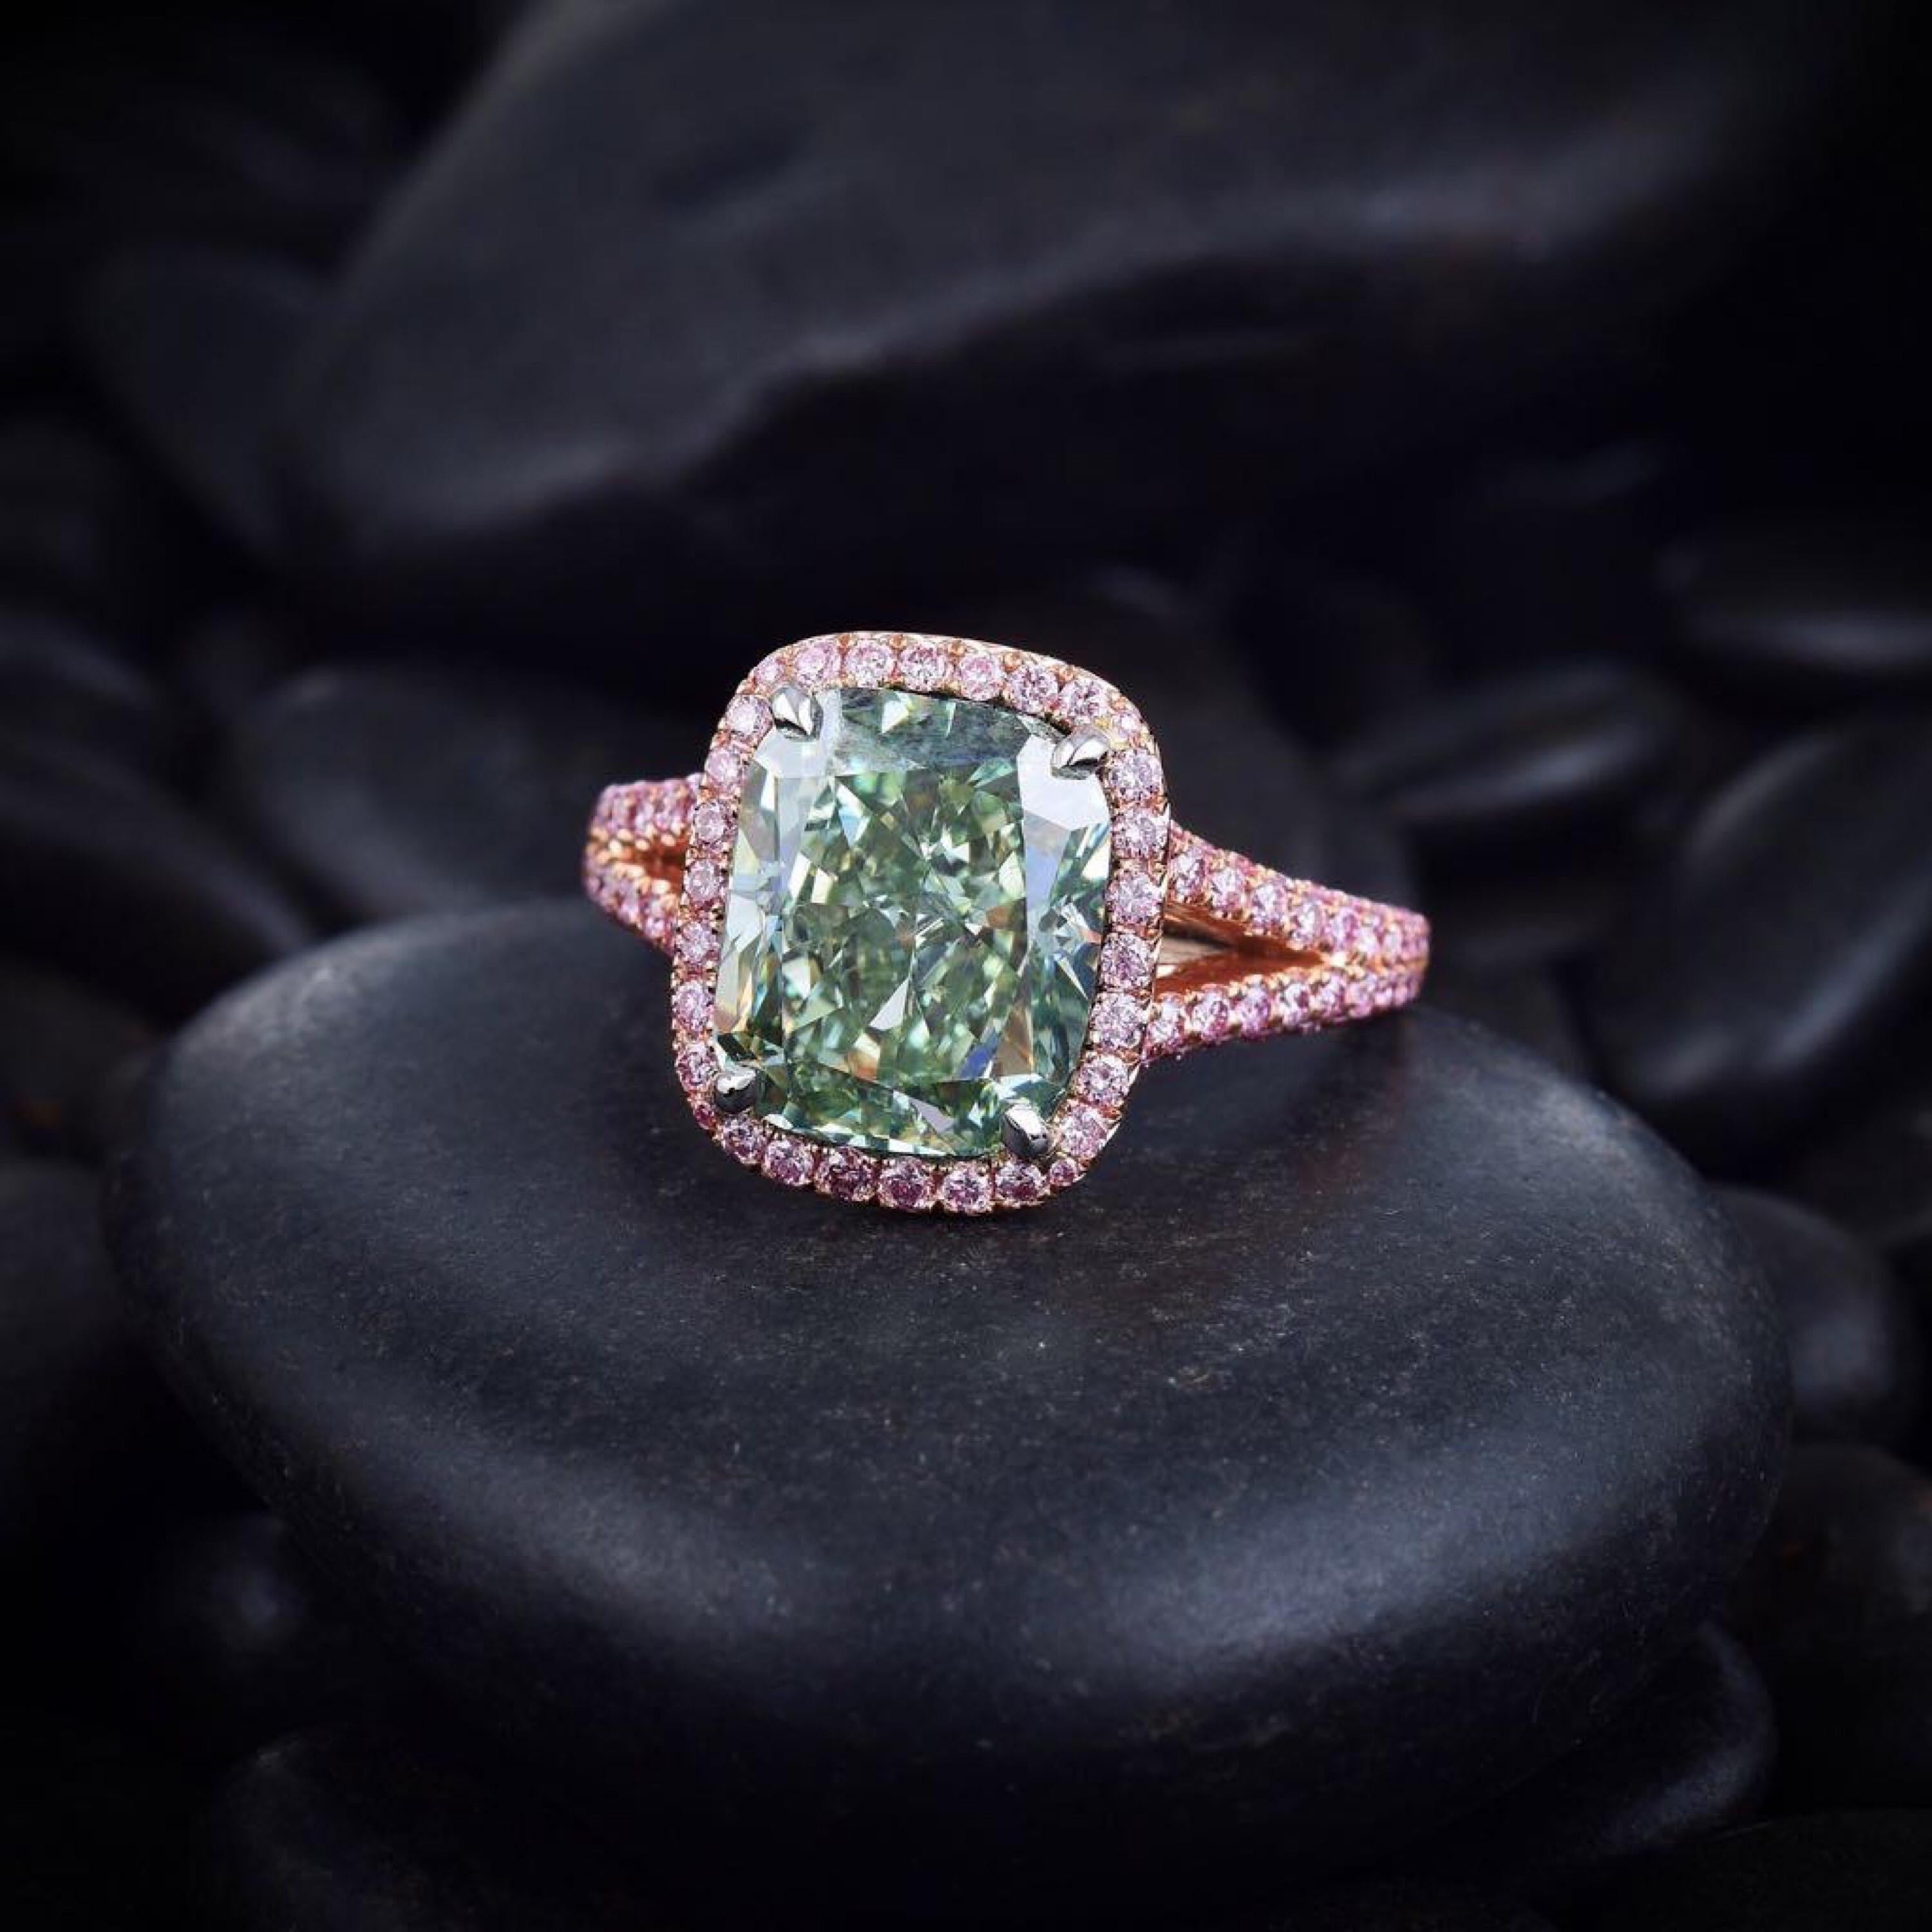 From the Emilio Jewelry Museum Vault, We are Showcasing a Gia certified 4.00 carat plus natural fancy intense green diamond in the center. The diamond is exceptional and clean. Please inquire for the video. Emilio Jewelry is a specialist and leader